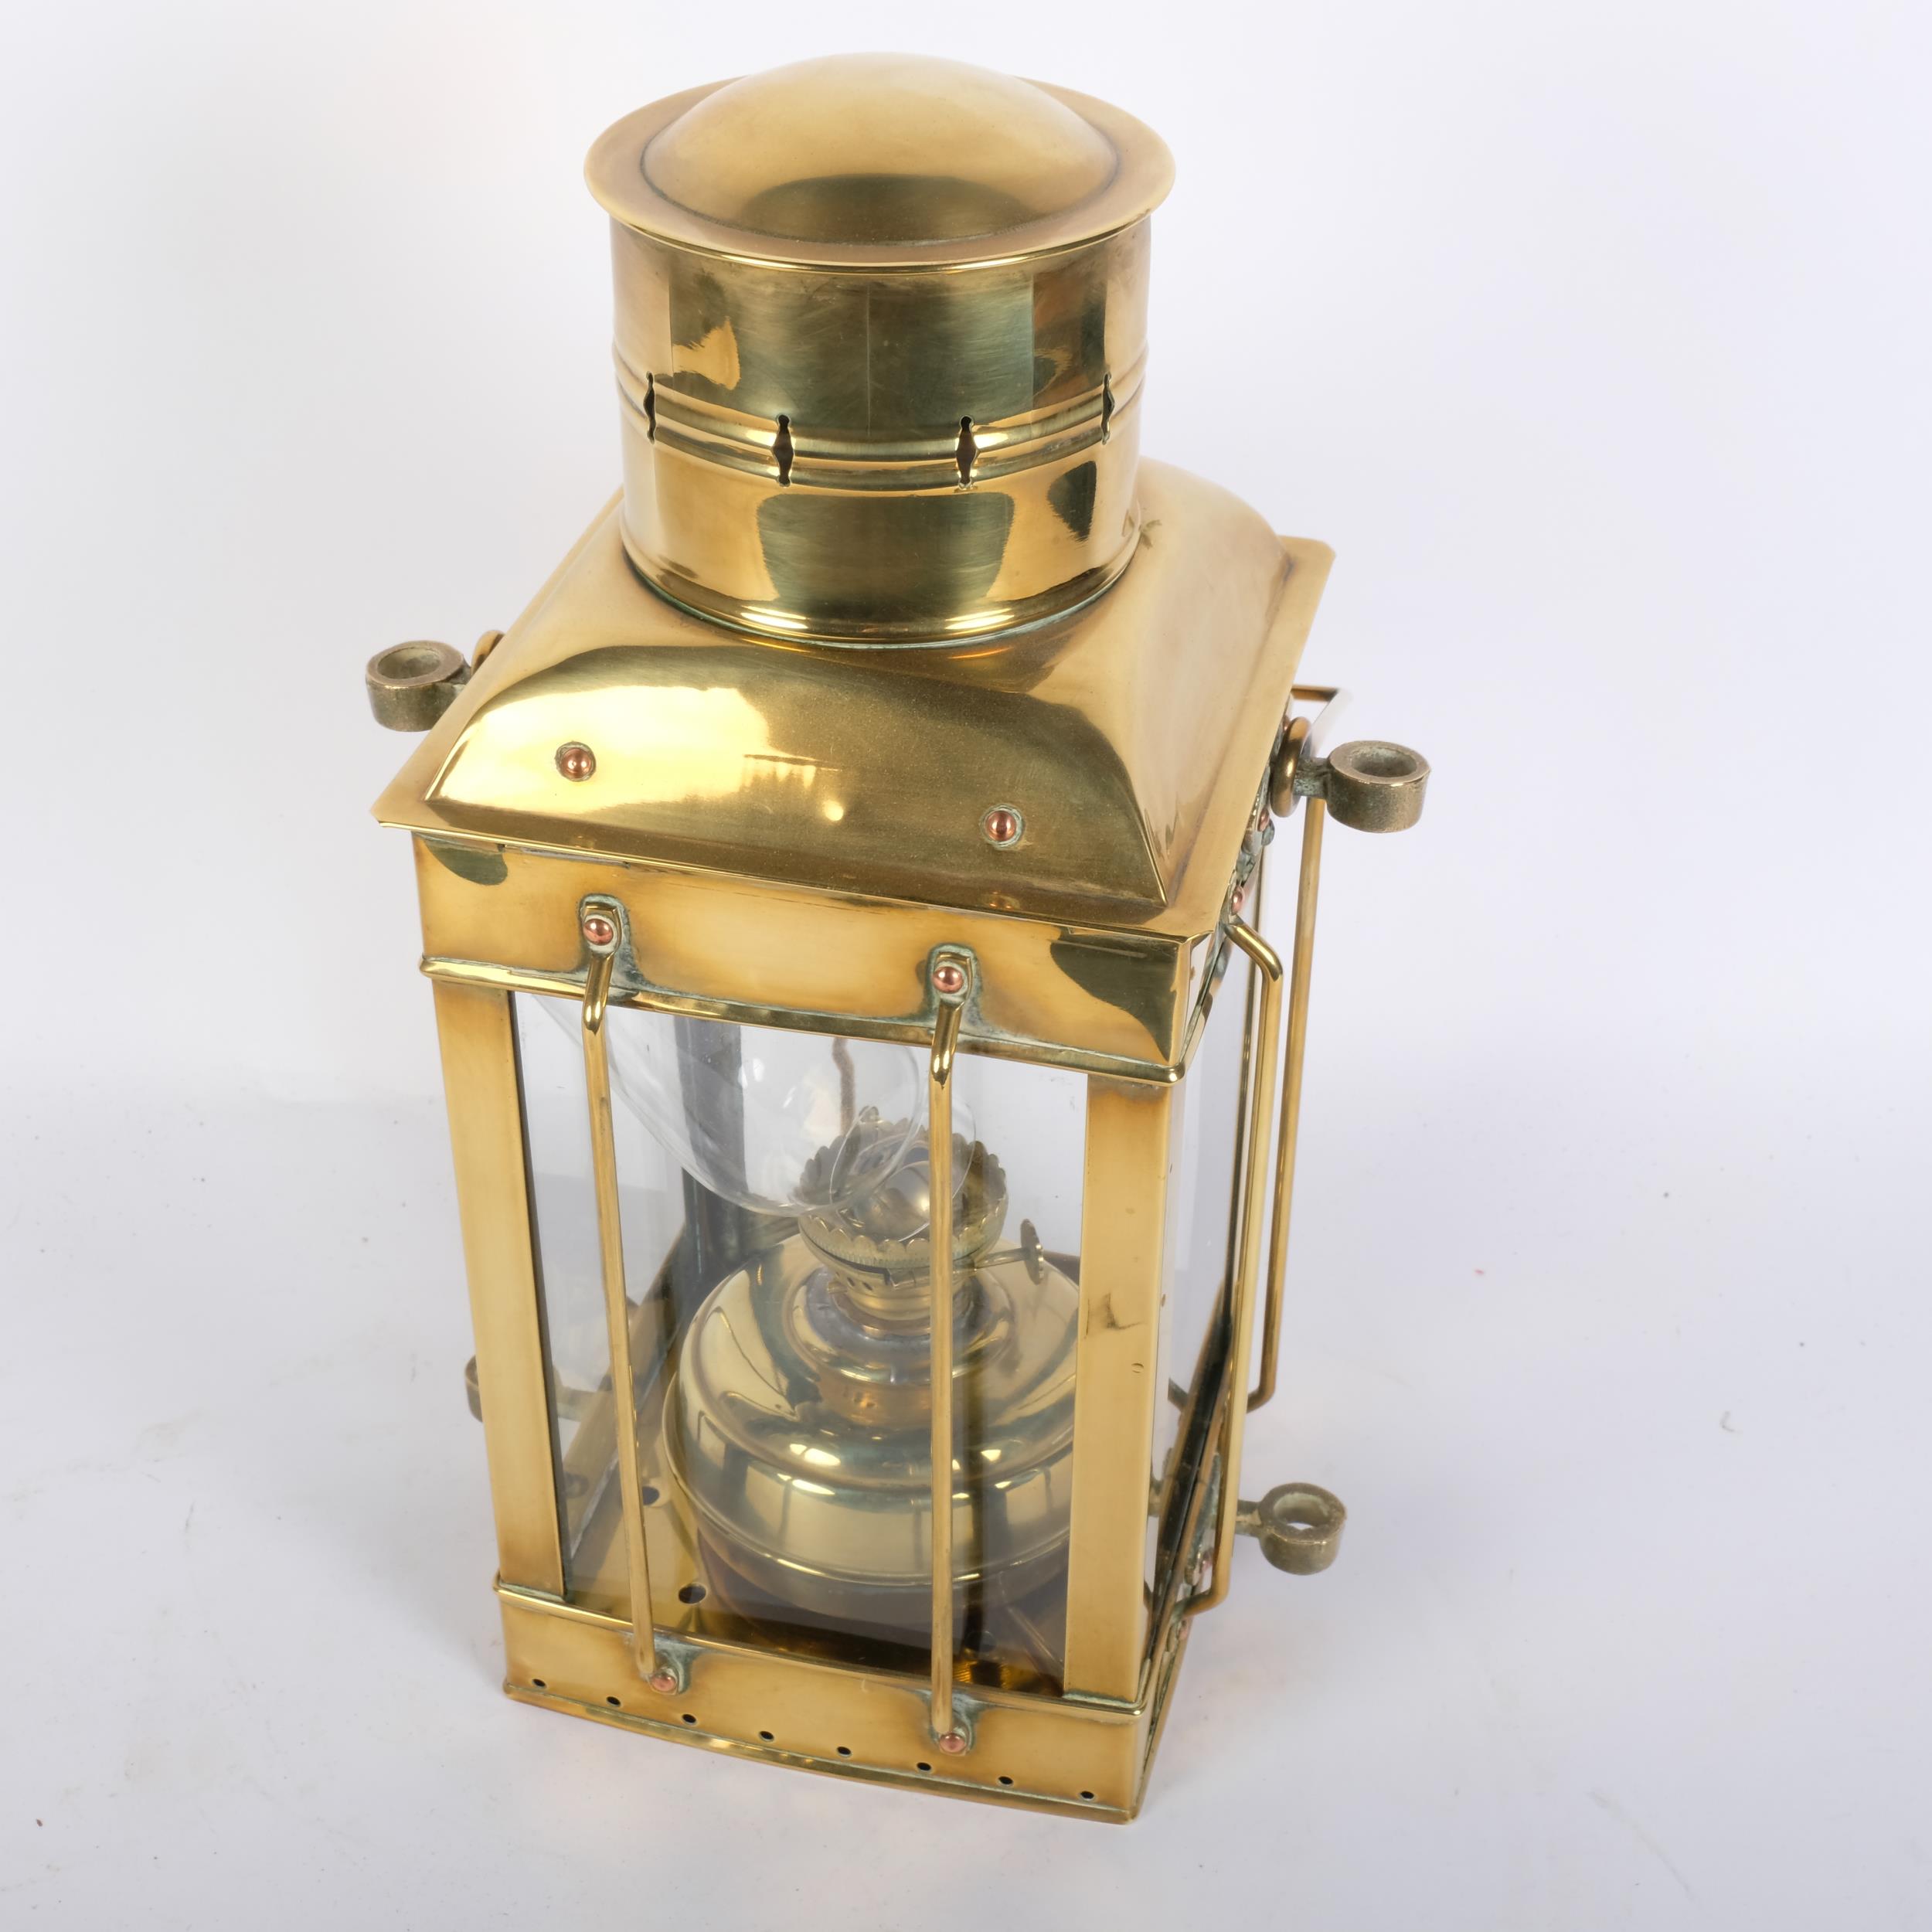 A 19th century brass cargo light, no. 3954, with embossed plaque, height not including handle 38cm - Image 2 of 2